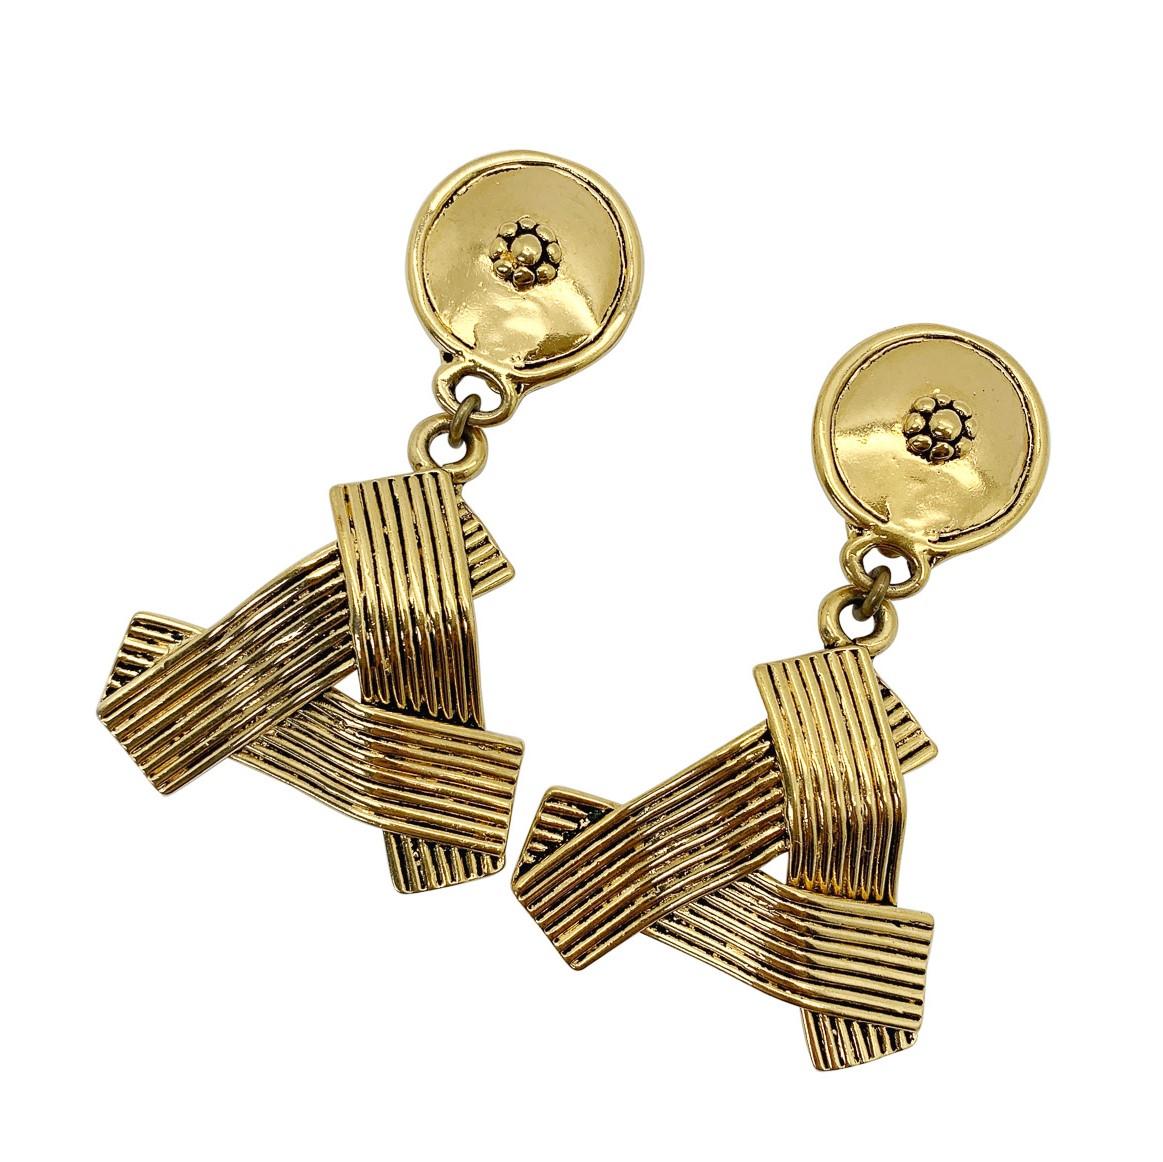 Vintage Ribbon Earrings. Featuring a triple crossed ribbon motif and button top. A perfect statement earring that will effortlessly elevate your look.

Vintage Condition: Very good without damage or noteworthy wear.
Materials: Gold plated